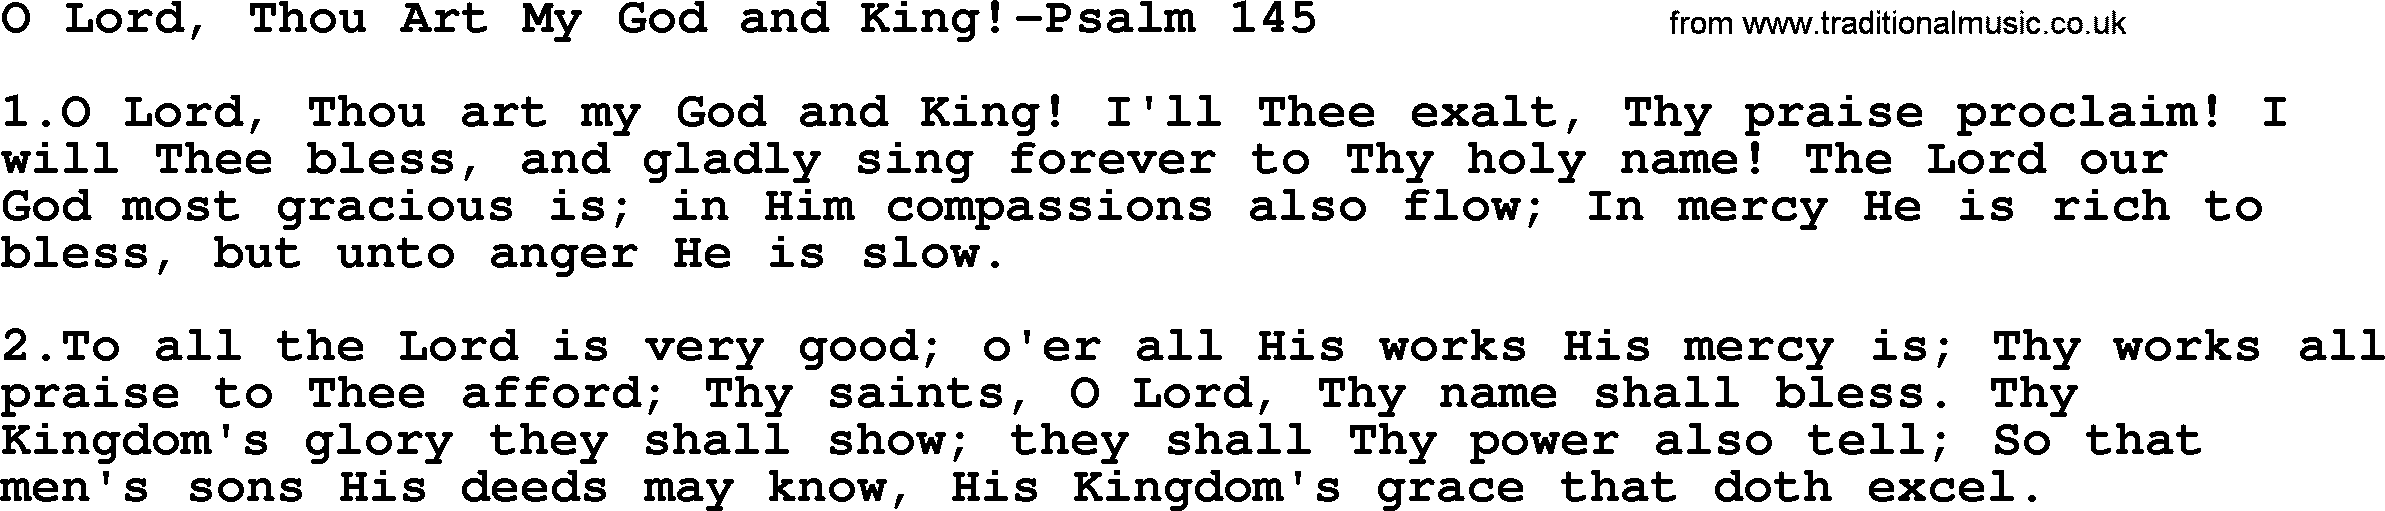 Hymns from the Psalms, Hymn: O Lord, Thou Art My God And King!-Psalm 145, lyrics with PDF